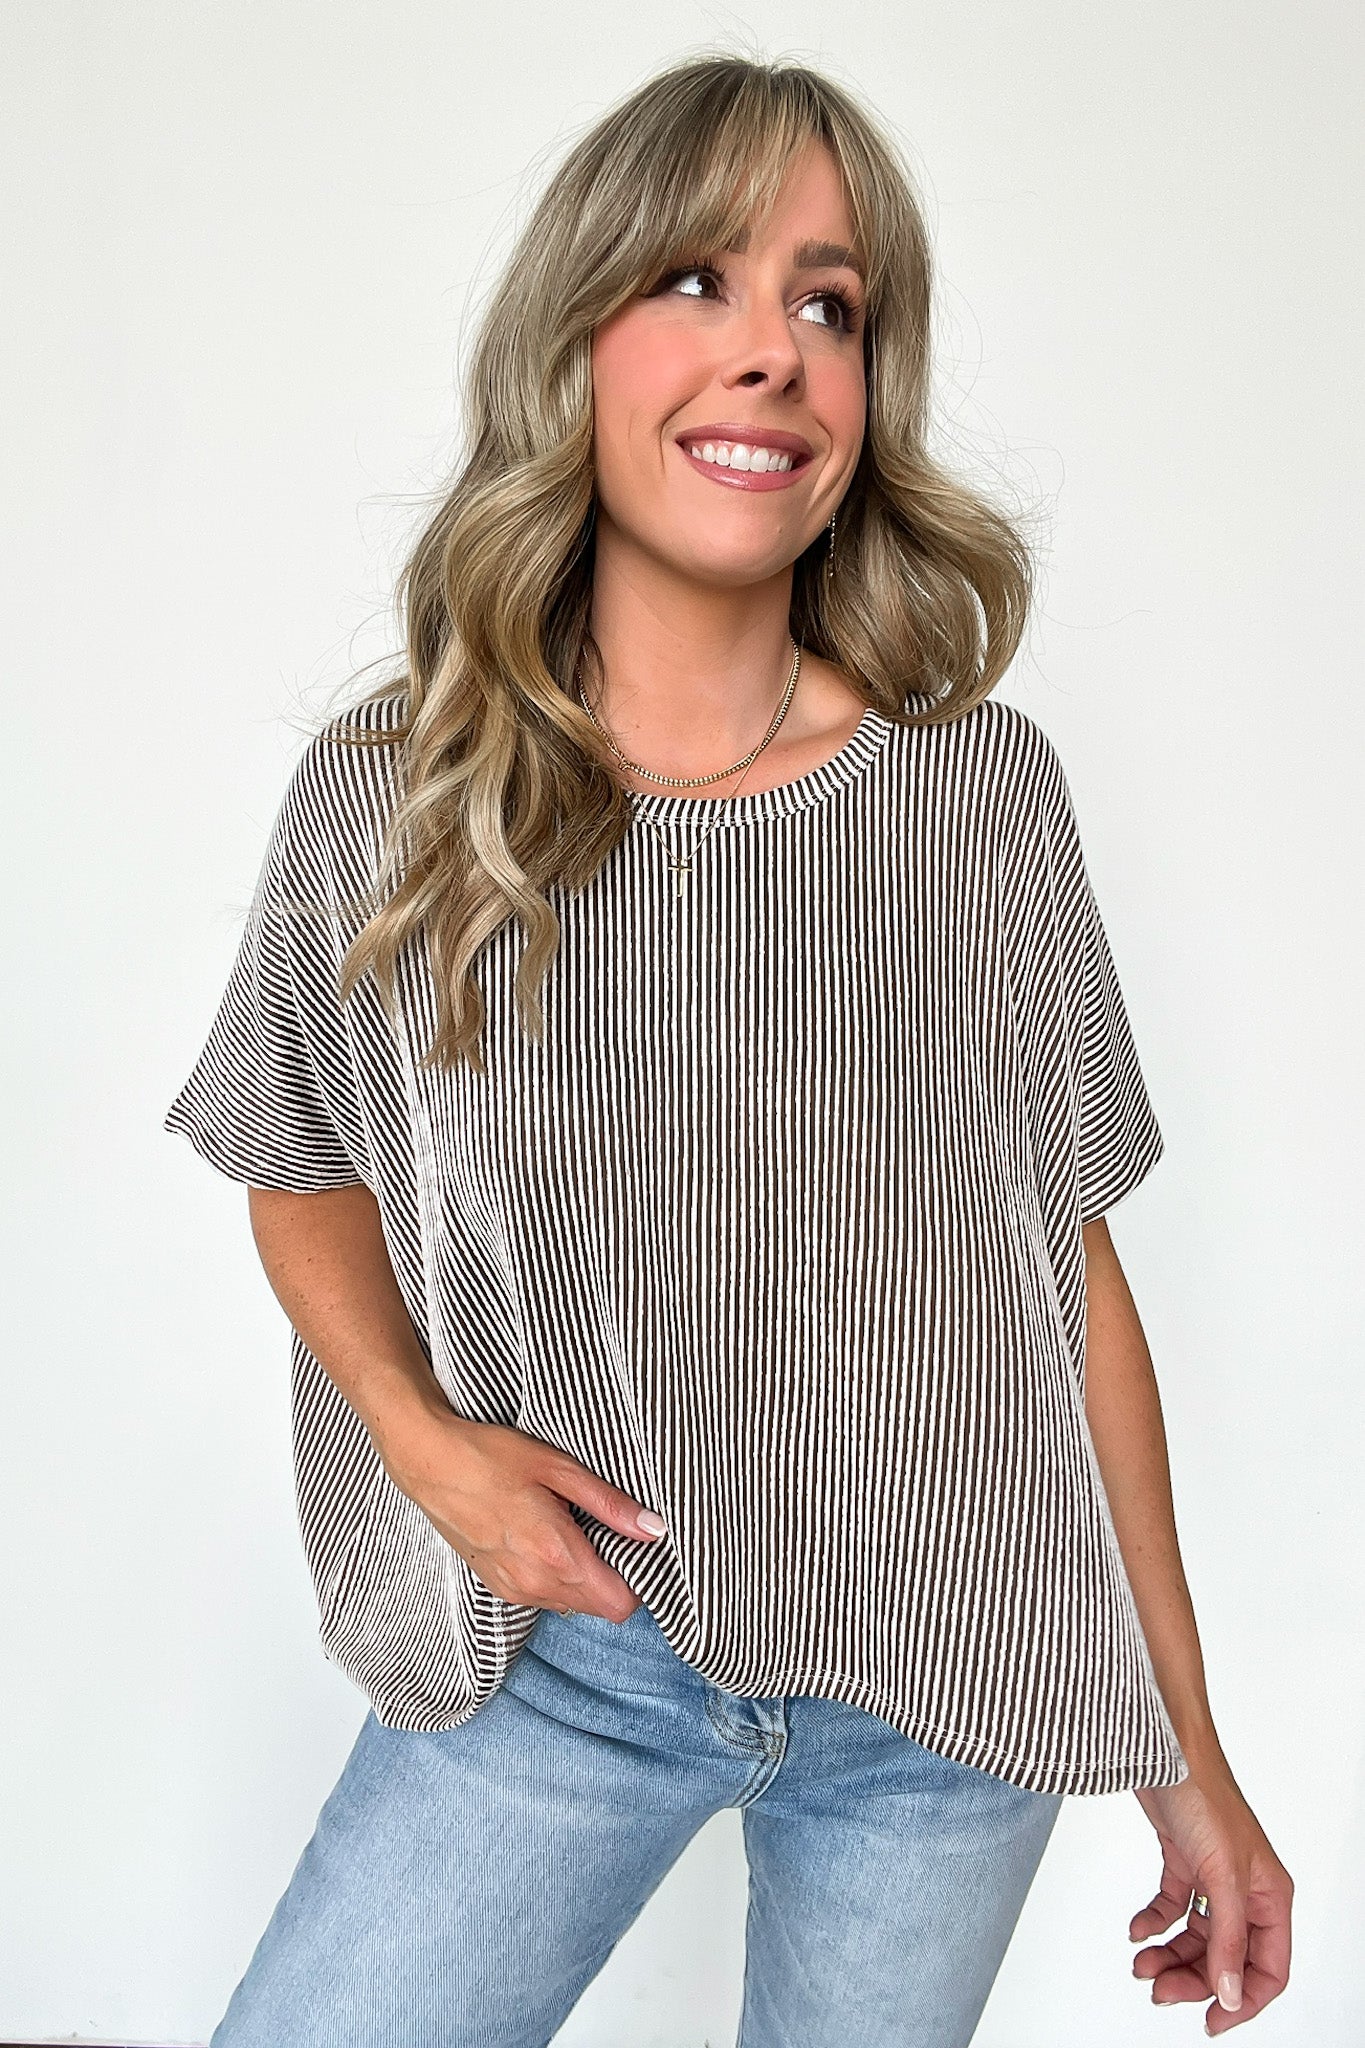  Beatryx Two Tone Rib Knit Oversized Top - BACK IN STOCK - Madison and Mallory